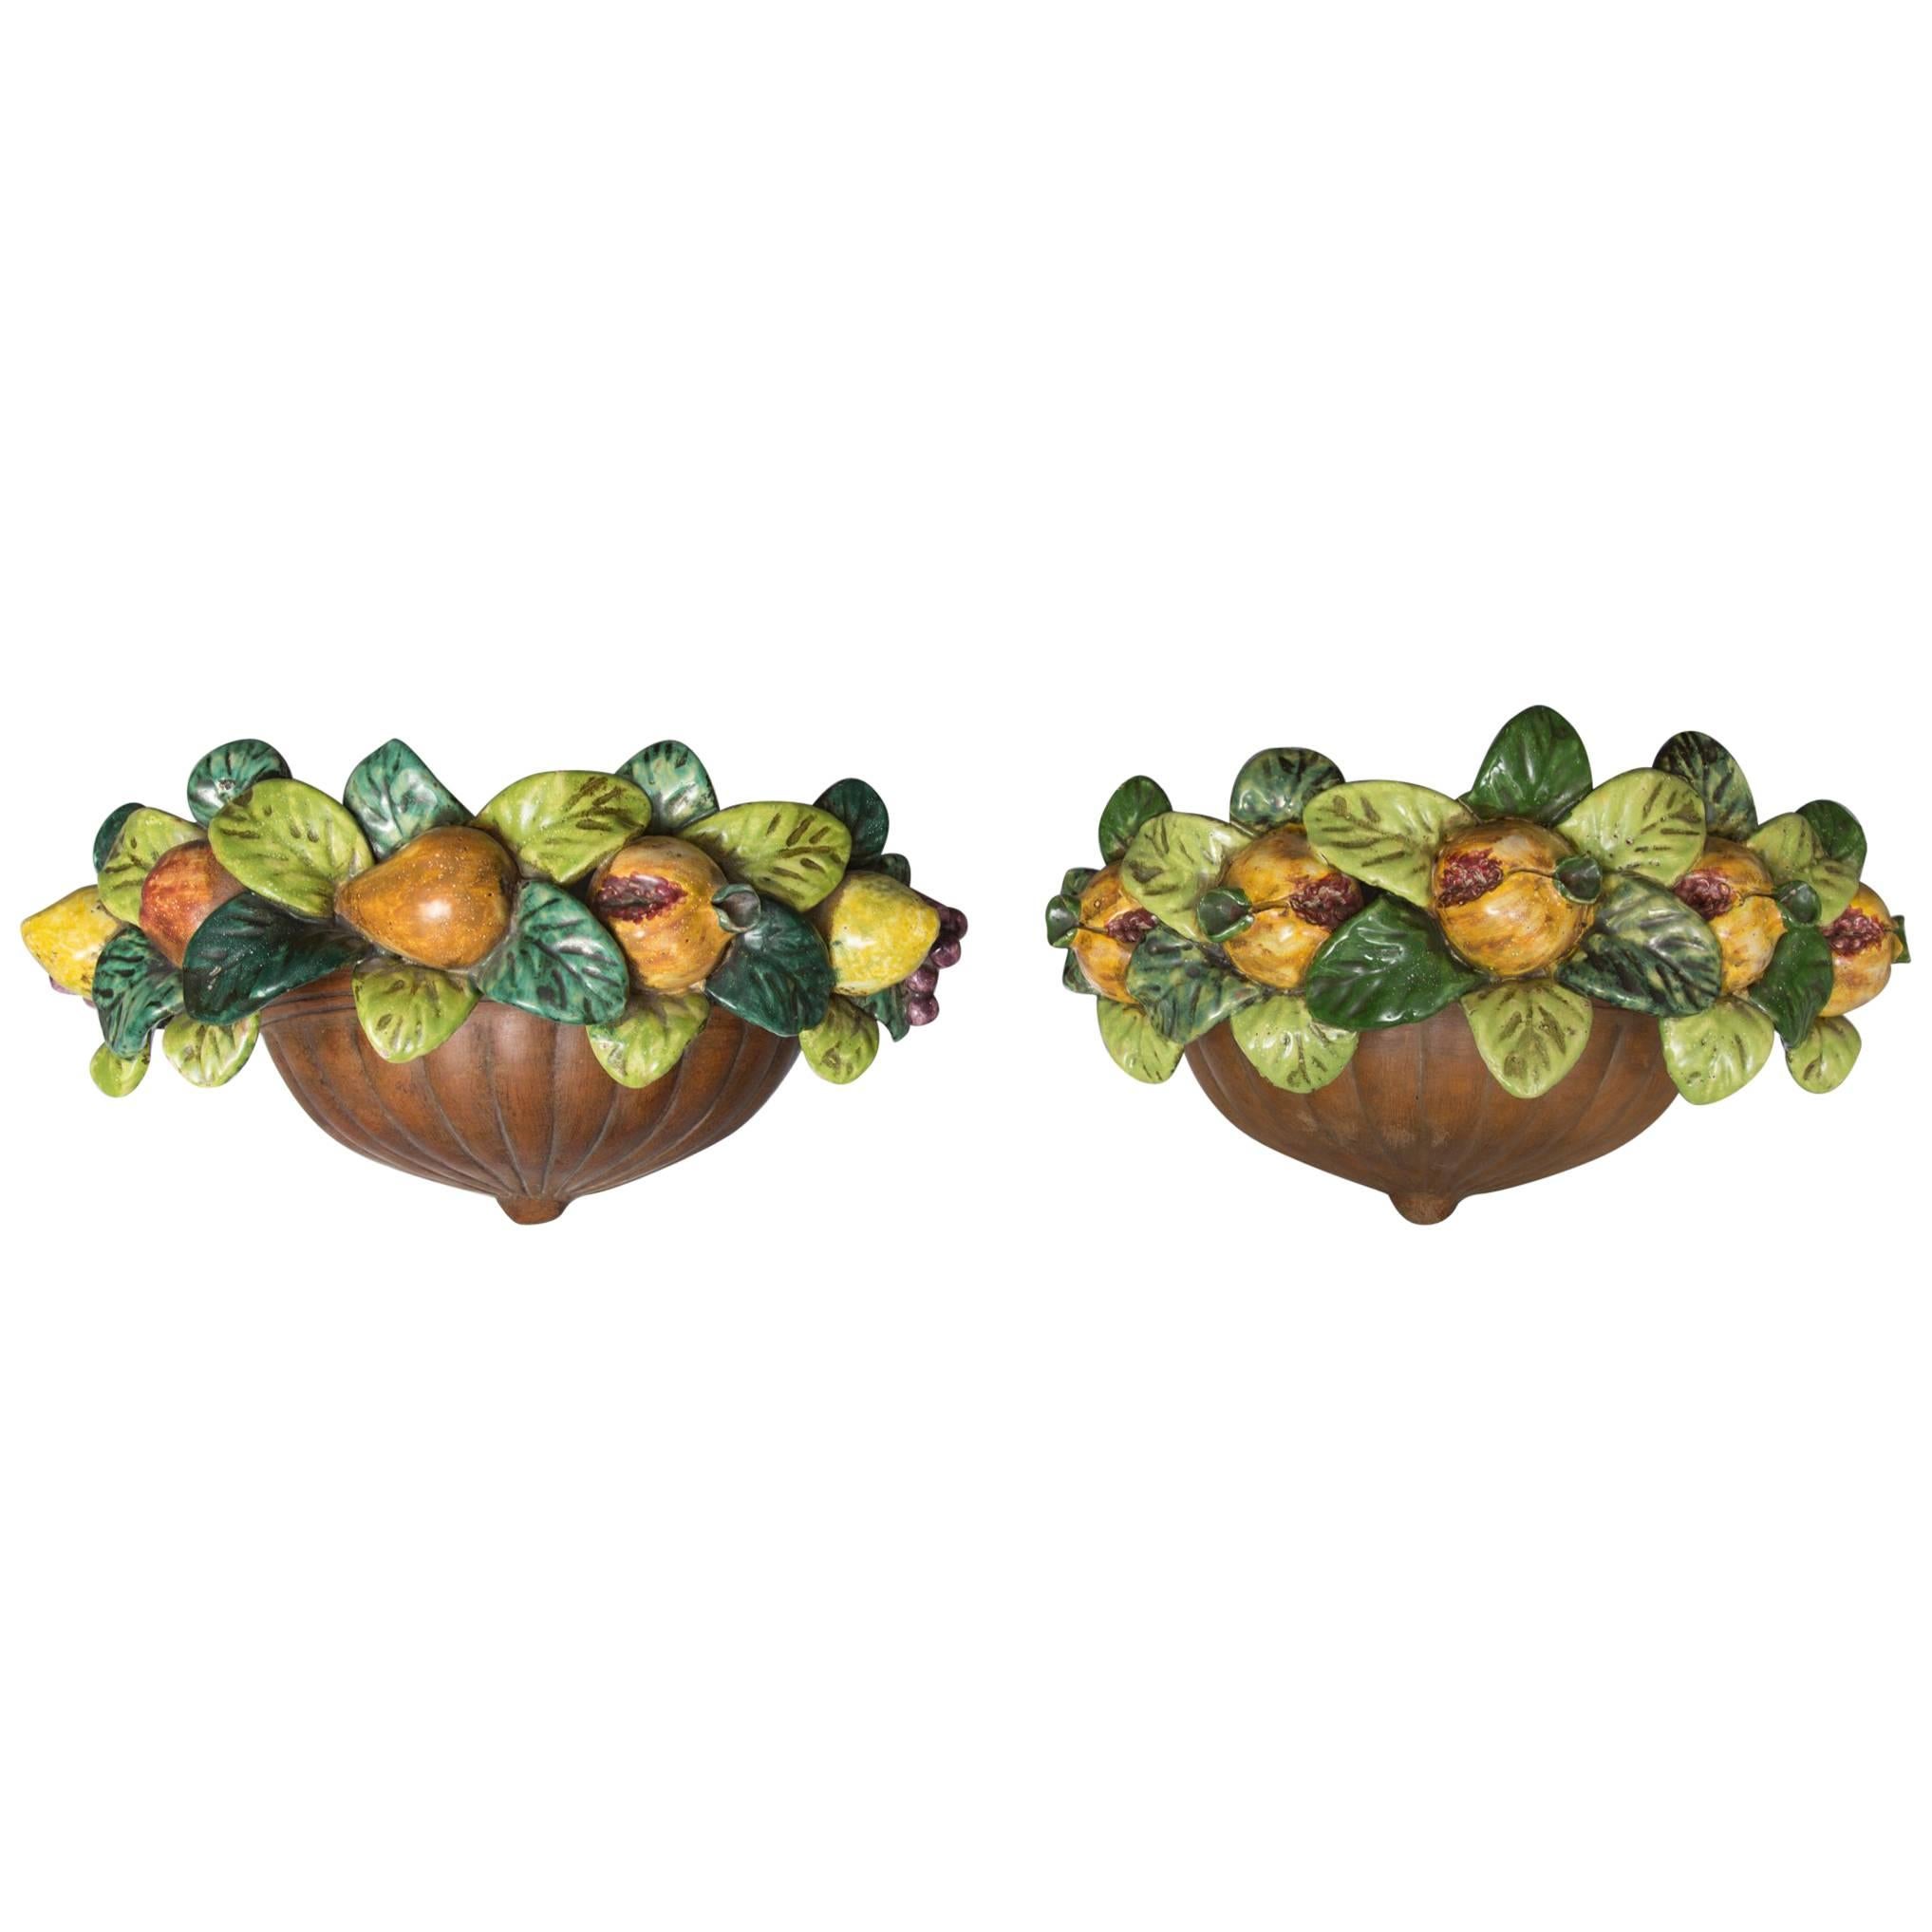 Pair of Italian Terracotta Wall Pockets with  Glazed Fruit Decoration  For Sale